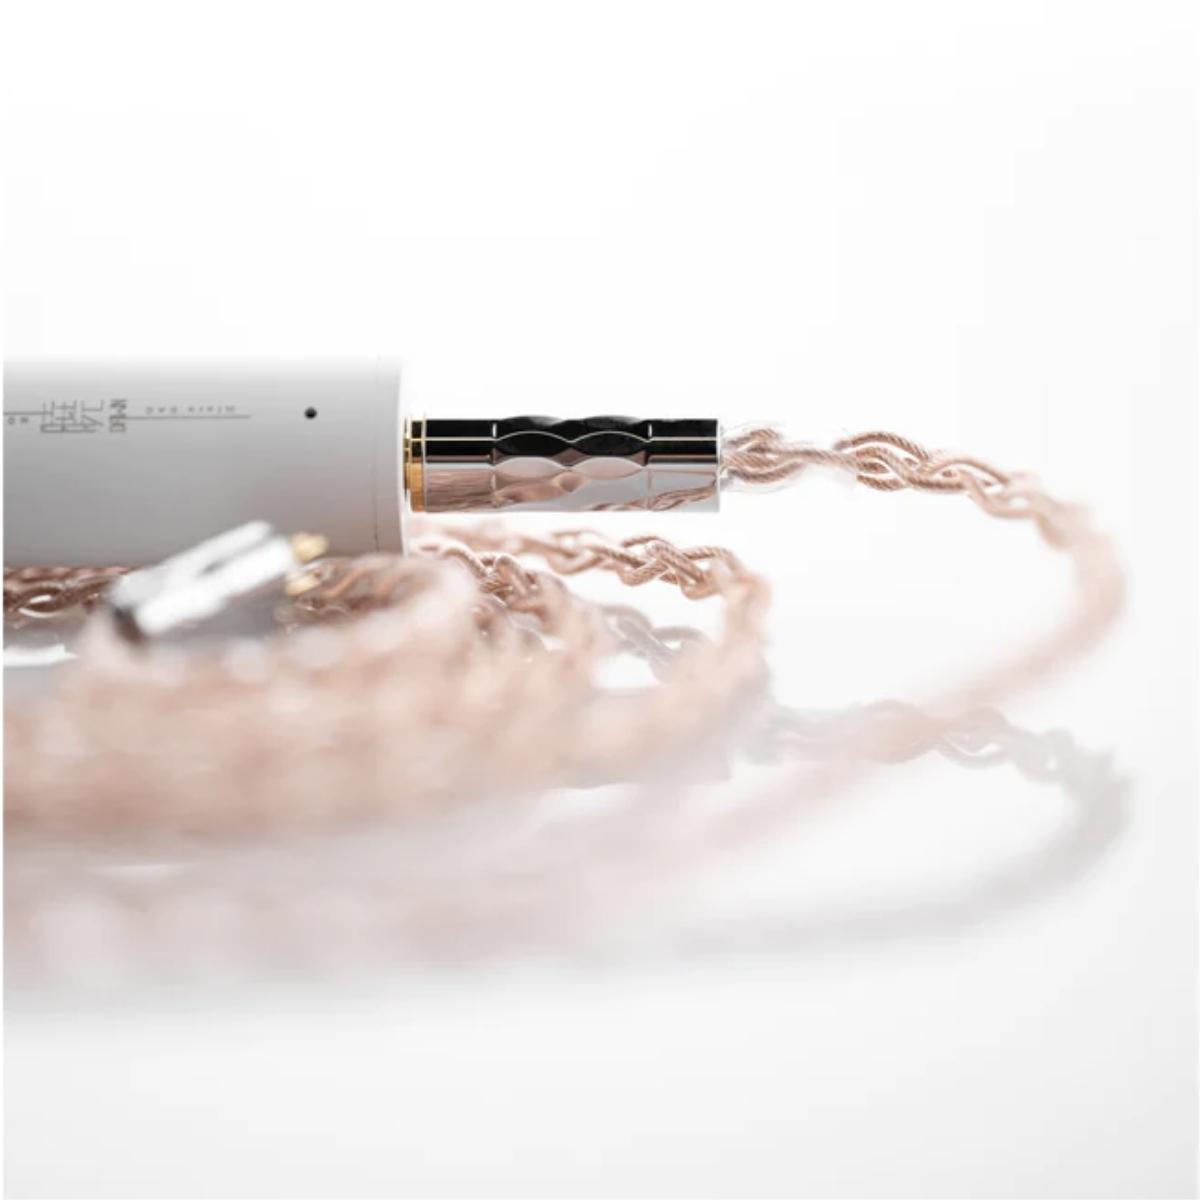 MOONDROP LINE T 6N Single Crystal Copper 196-Core Litz Upgrade Cable for IEMs